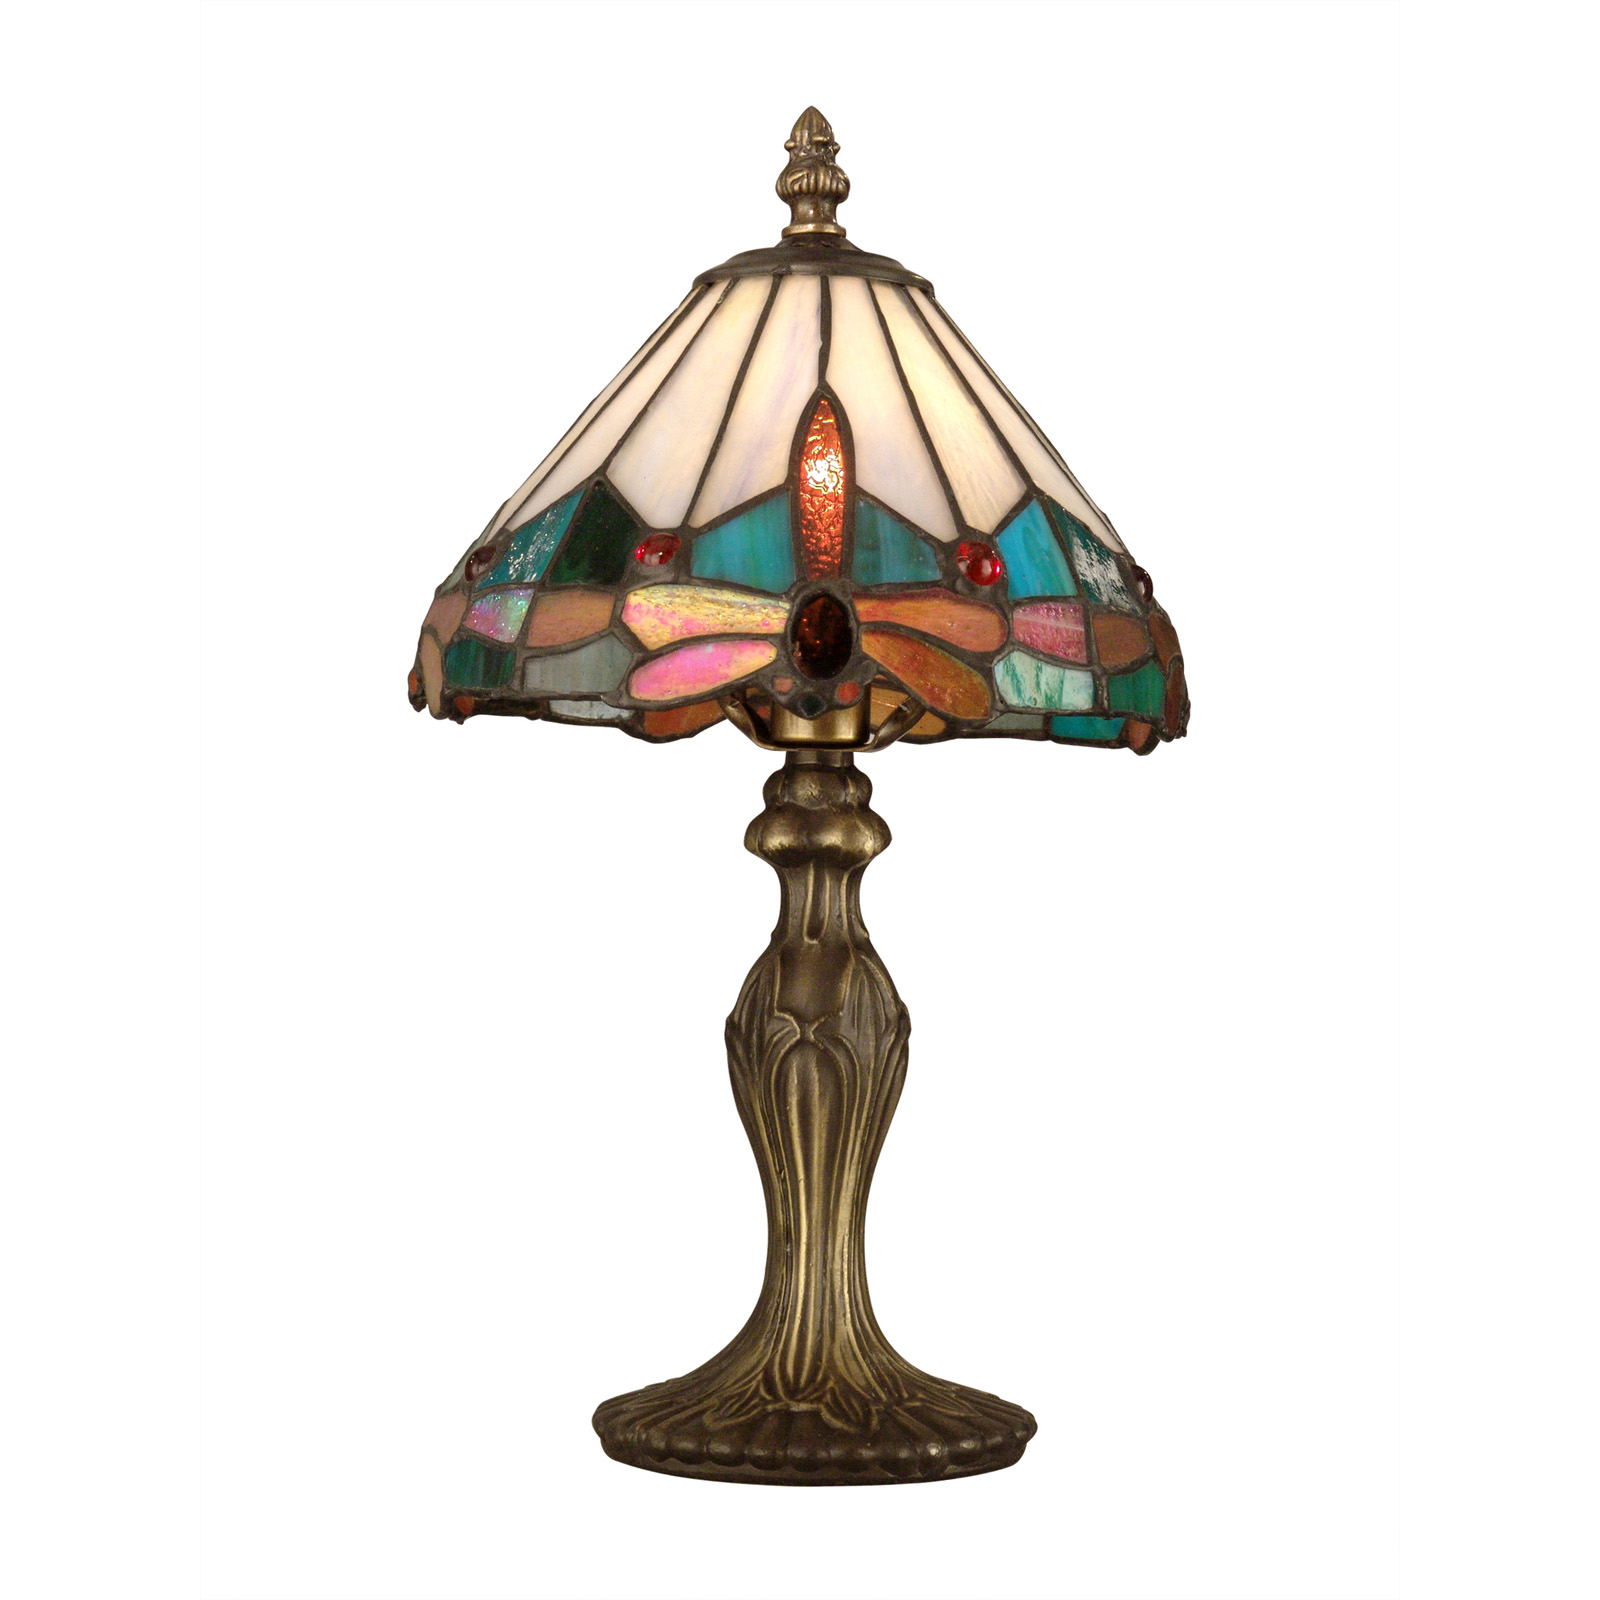 Tiffany Jewel Dragonfly 13.5" H Table Lamp with Empire Shade